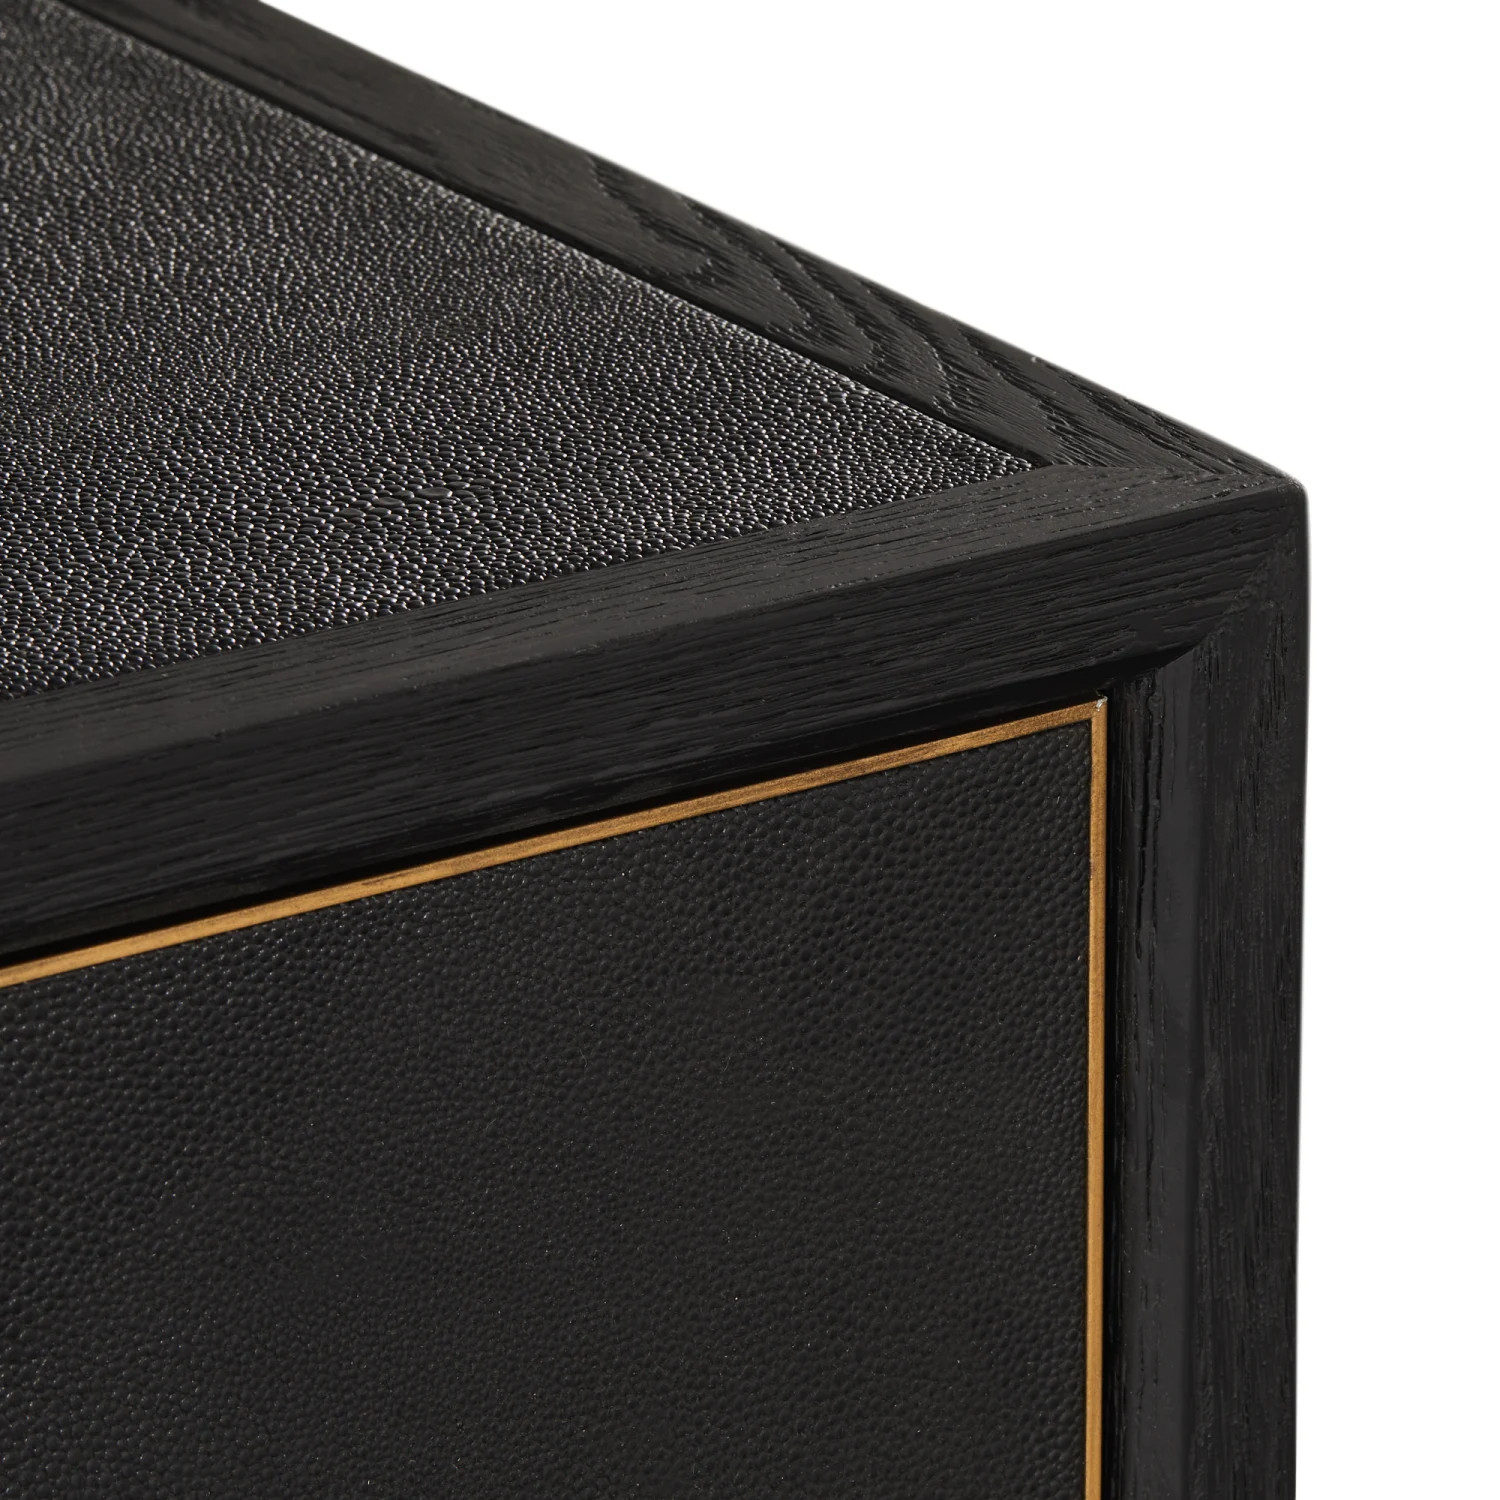 Sebastien Side Table with 3 Drawers - Black Shagreen/Antique Brass